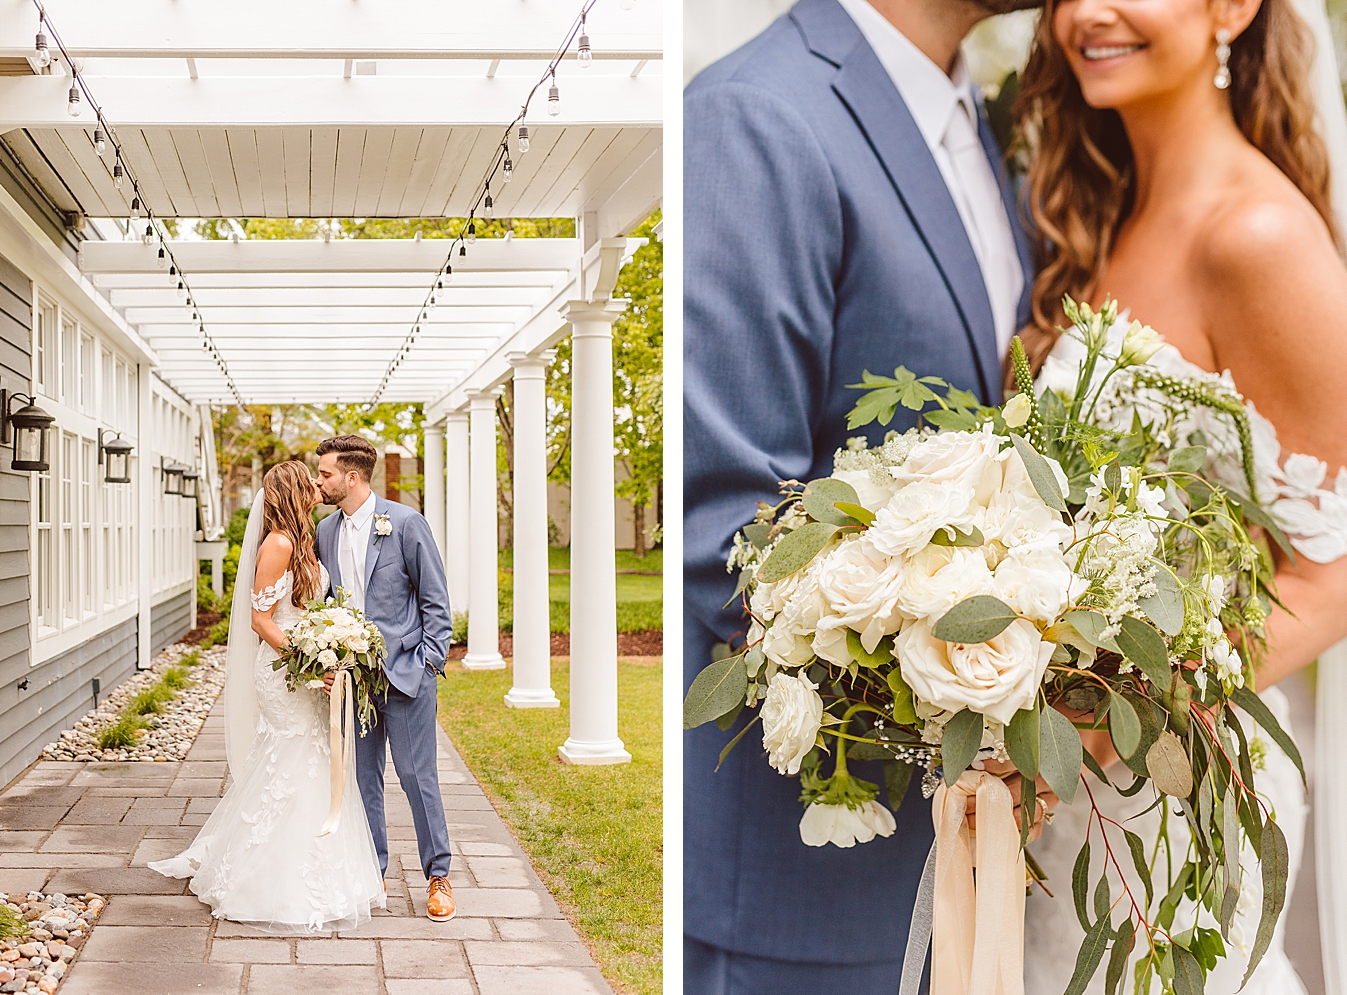 Bride and groom kissing under pergola at Chesapeake Bay Beach Club | Bridal bouquet filled with white roses and lush greenery | Brooke Michelle Photo